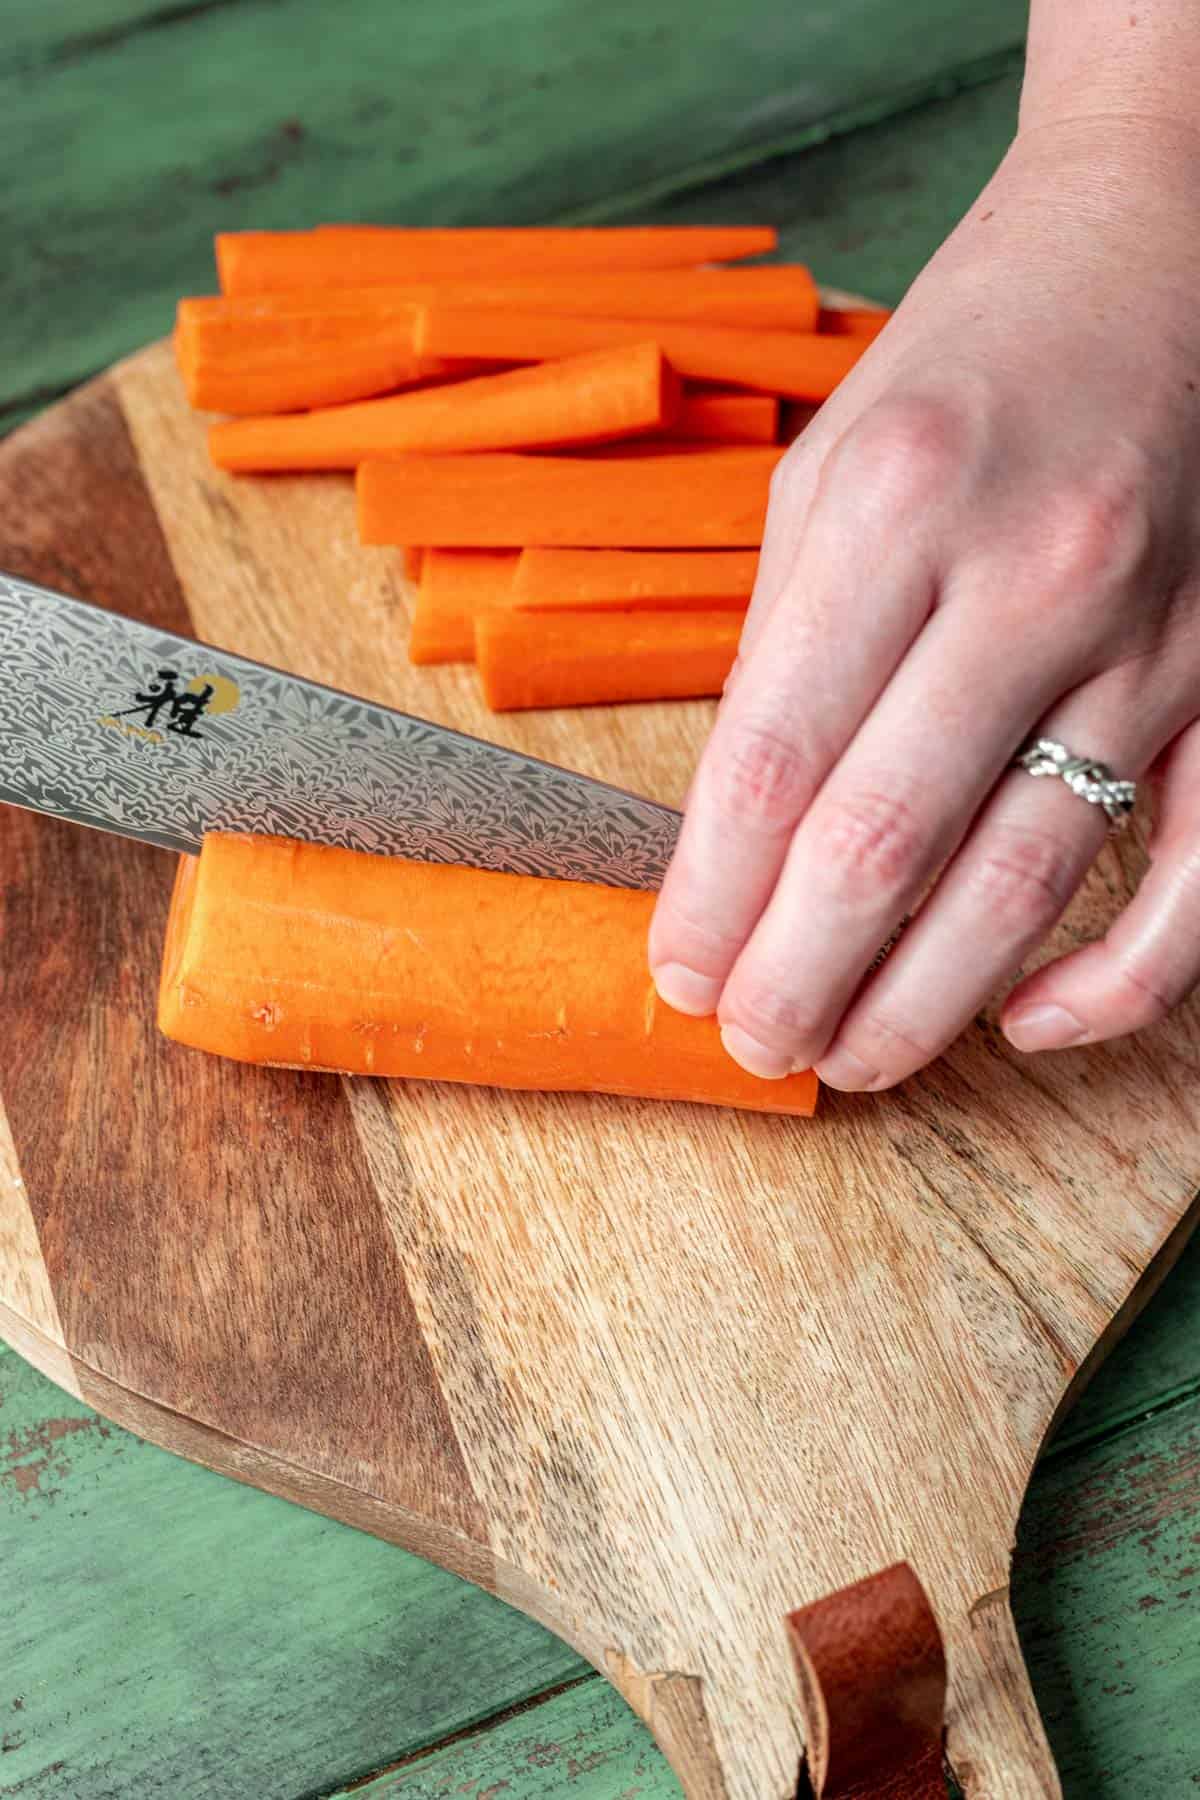 A chef's knife slicing carrots in half lengthwise.